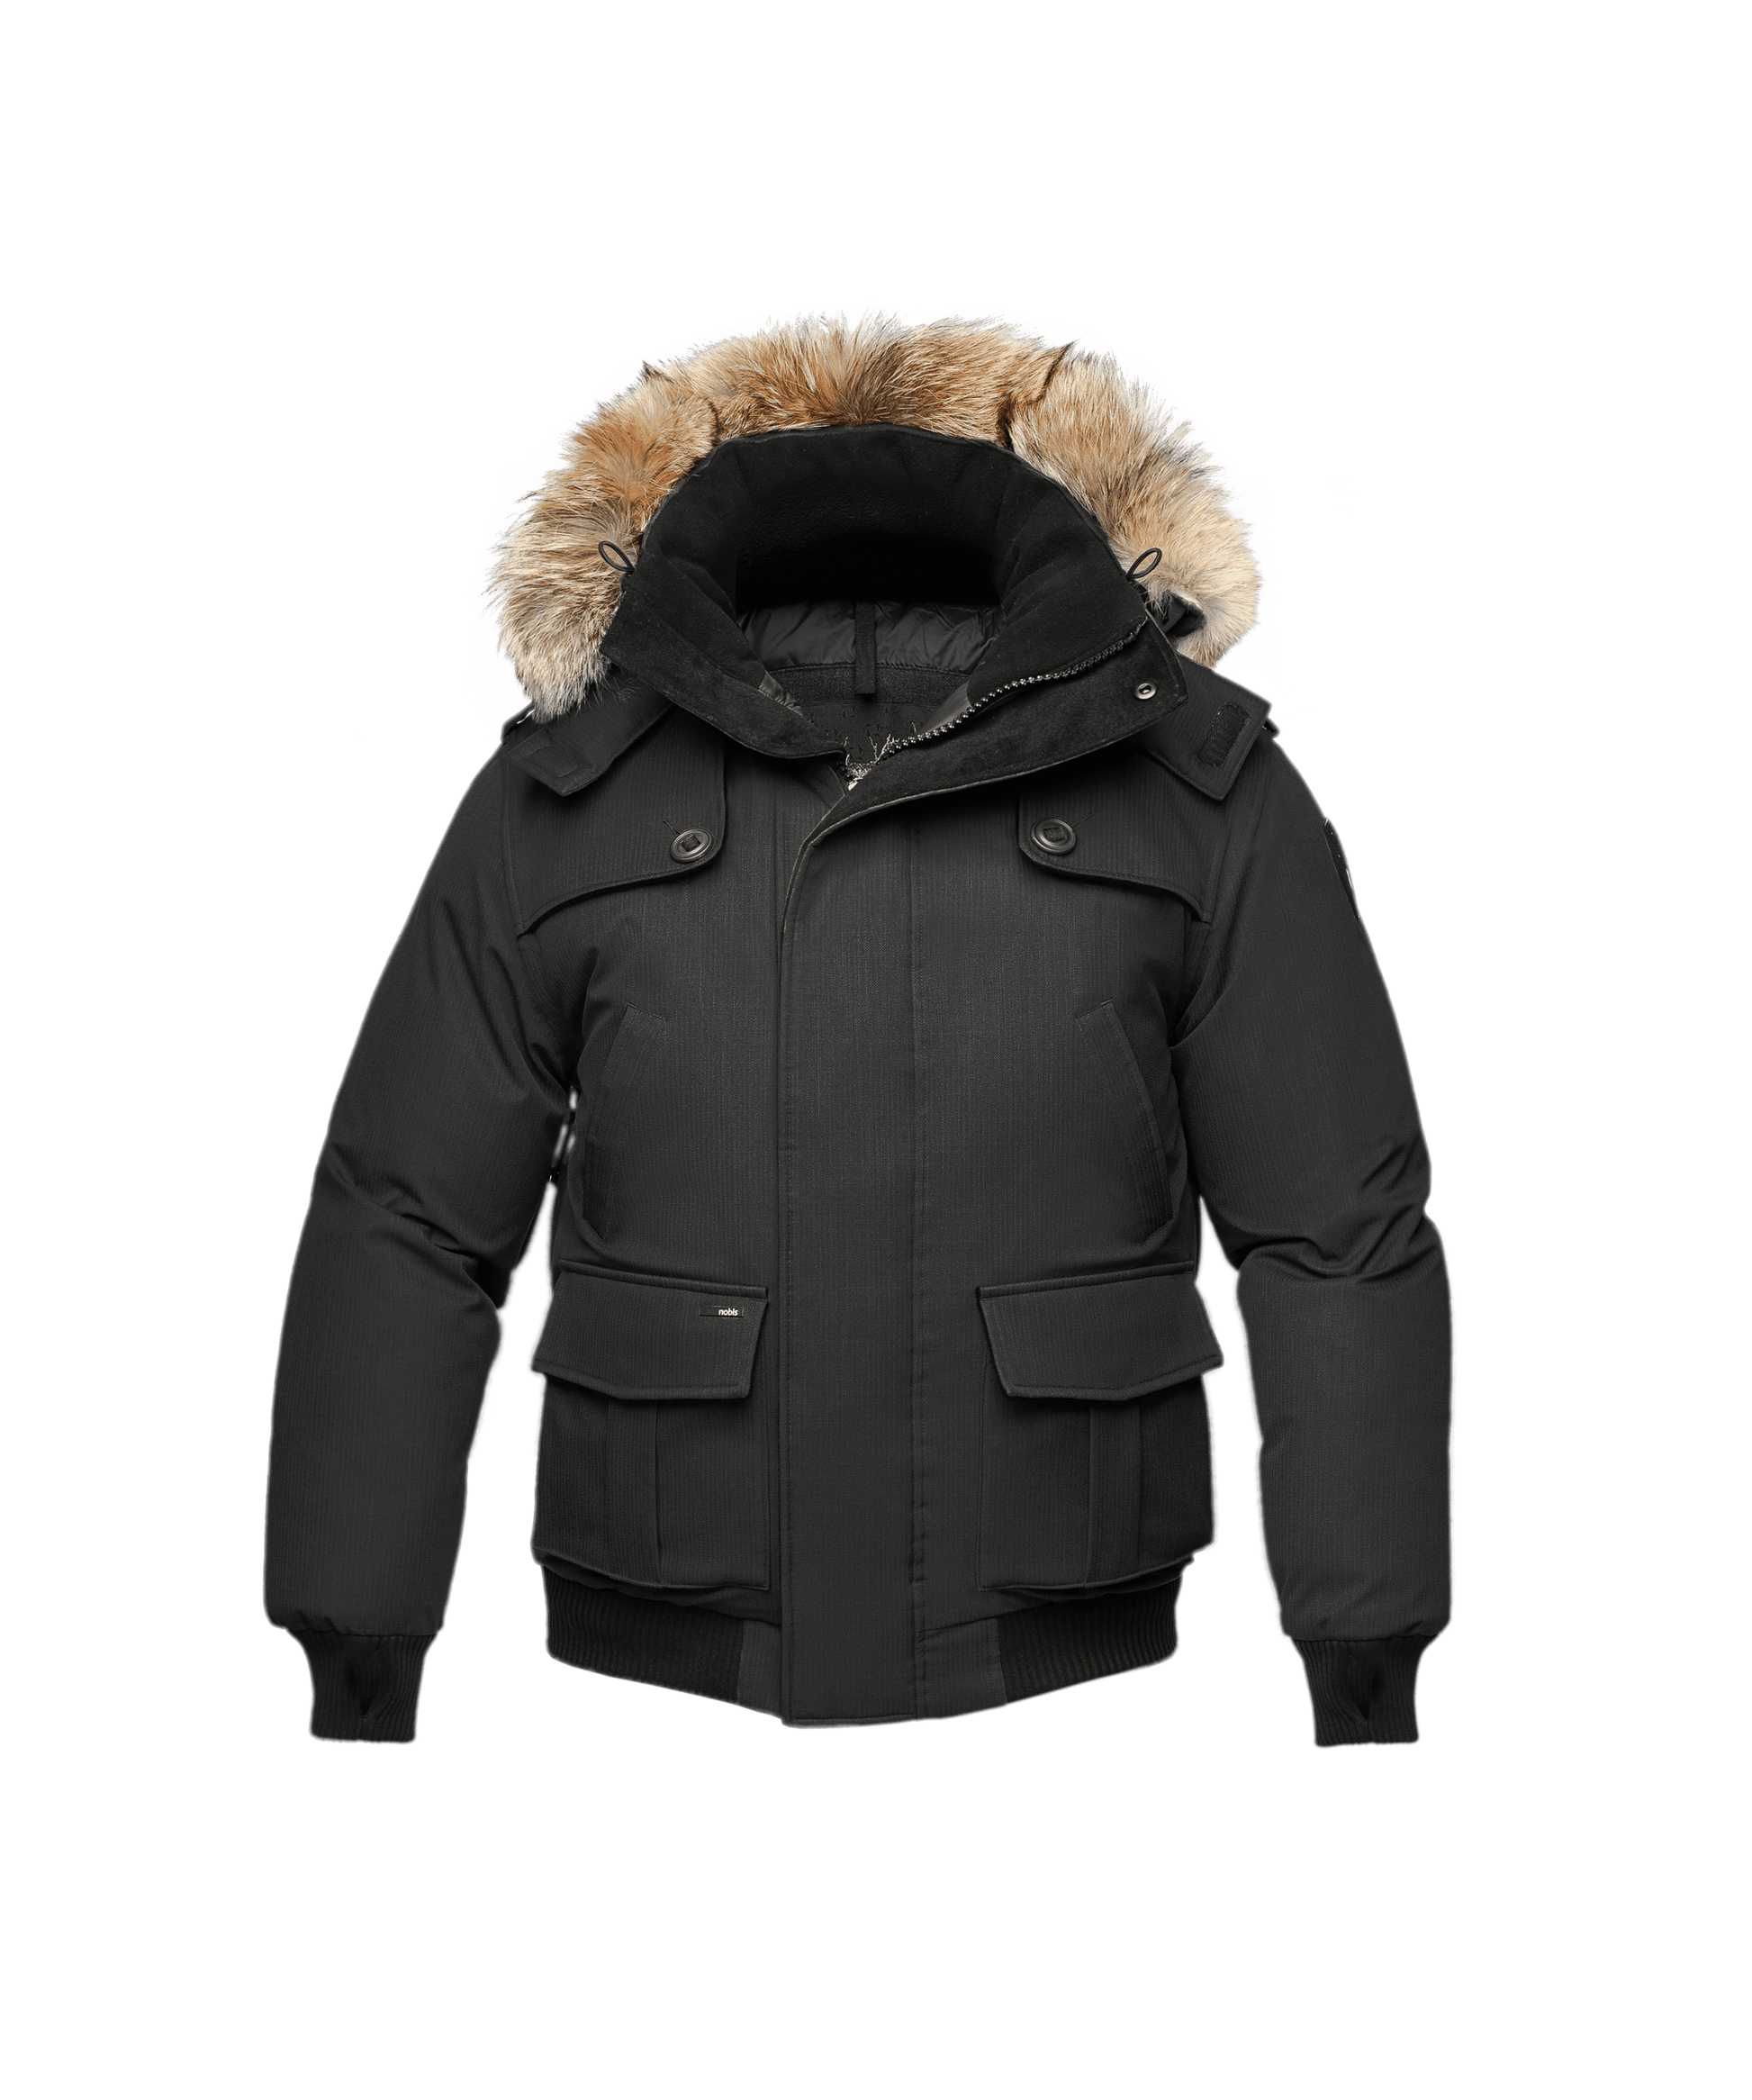 Men's down filled bomber that sits just above the hips with a completely removable hood that's windproof, waterproof, and breathable in Cy Black